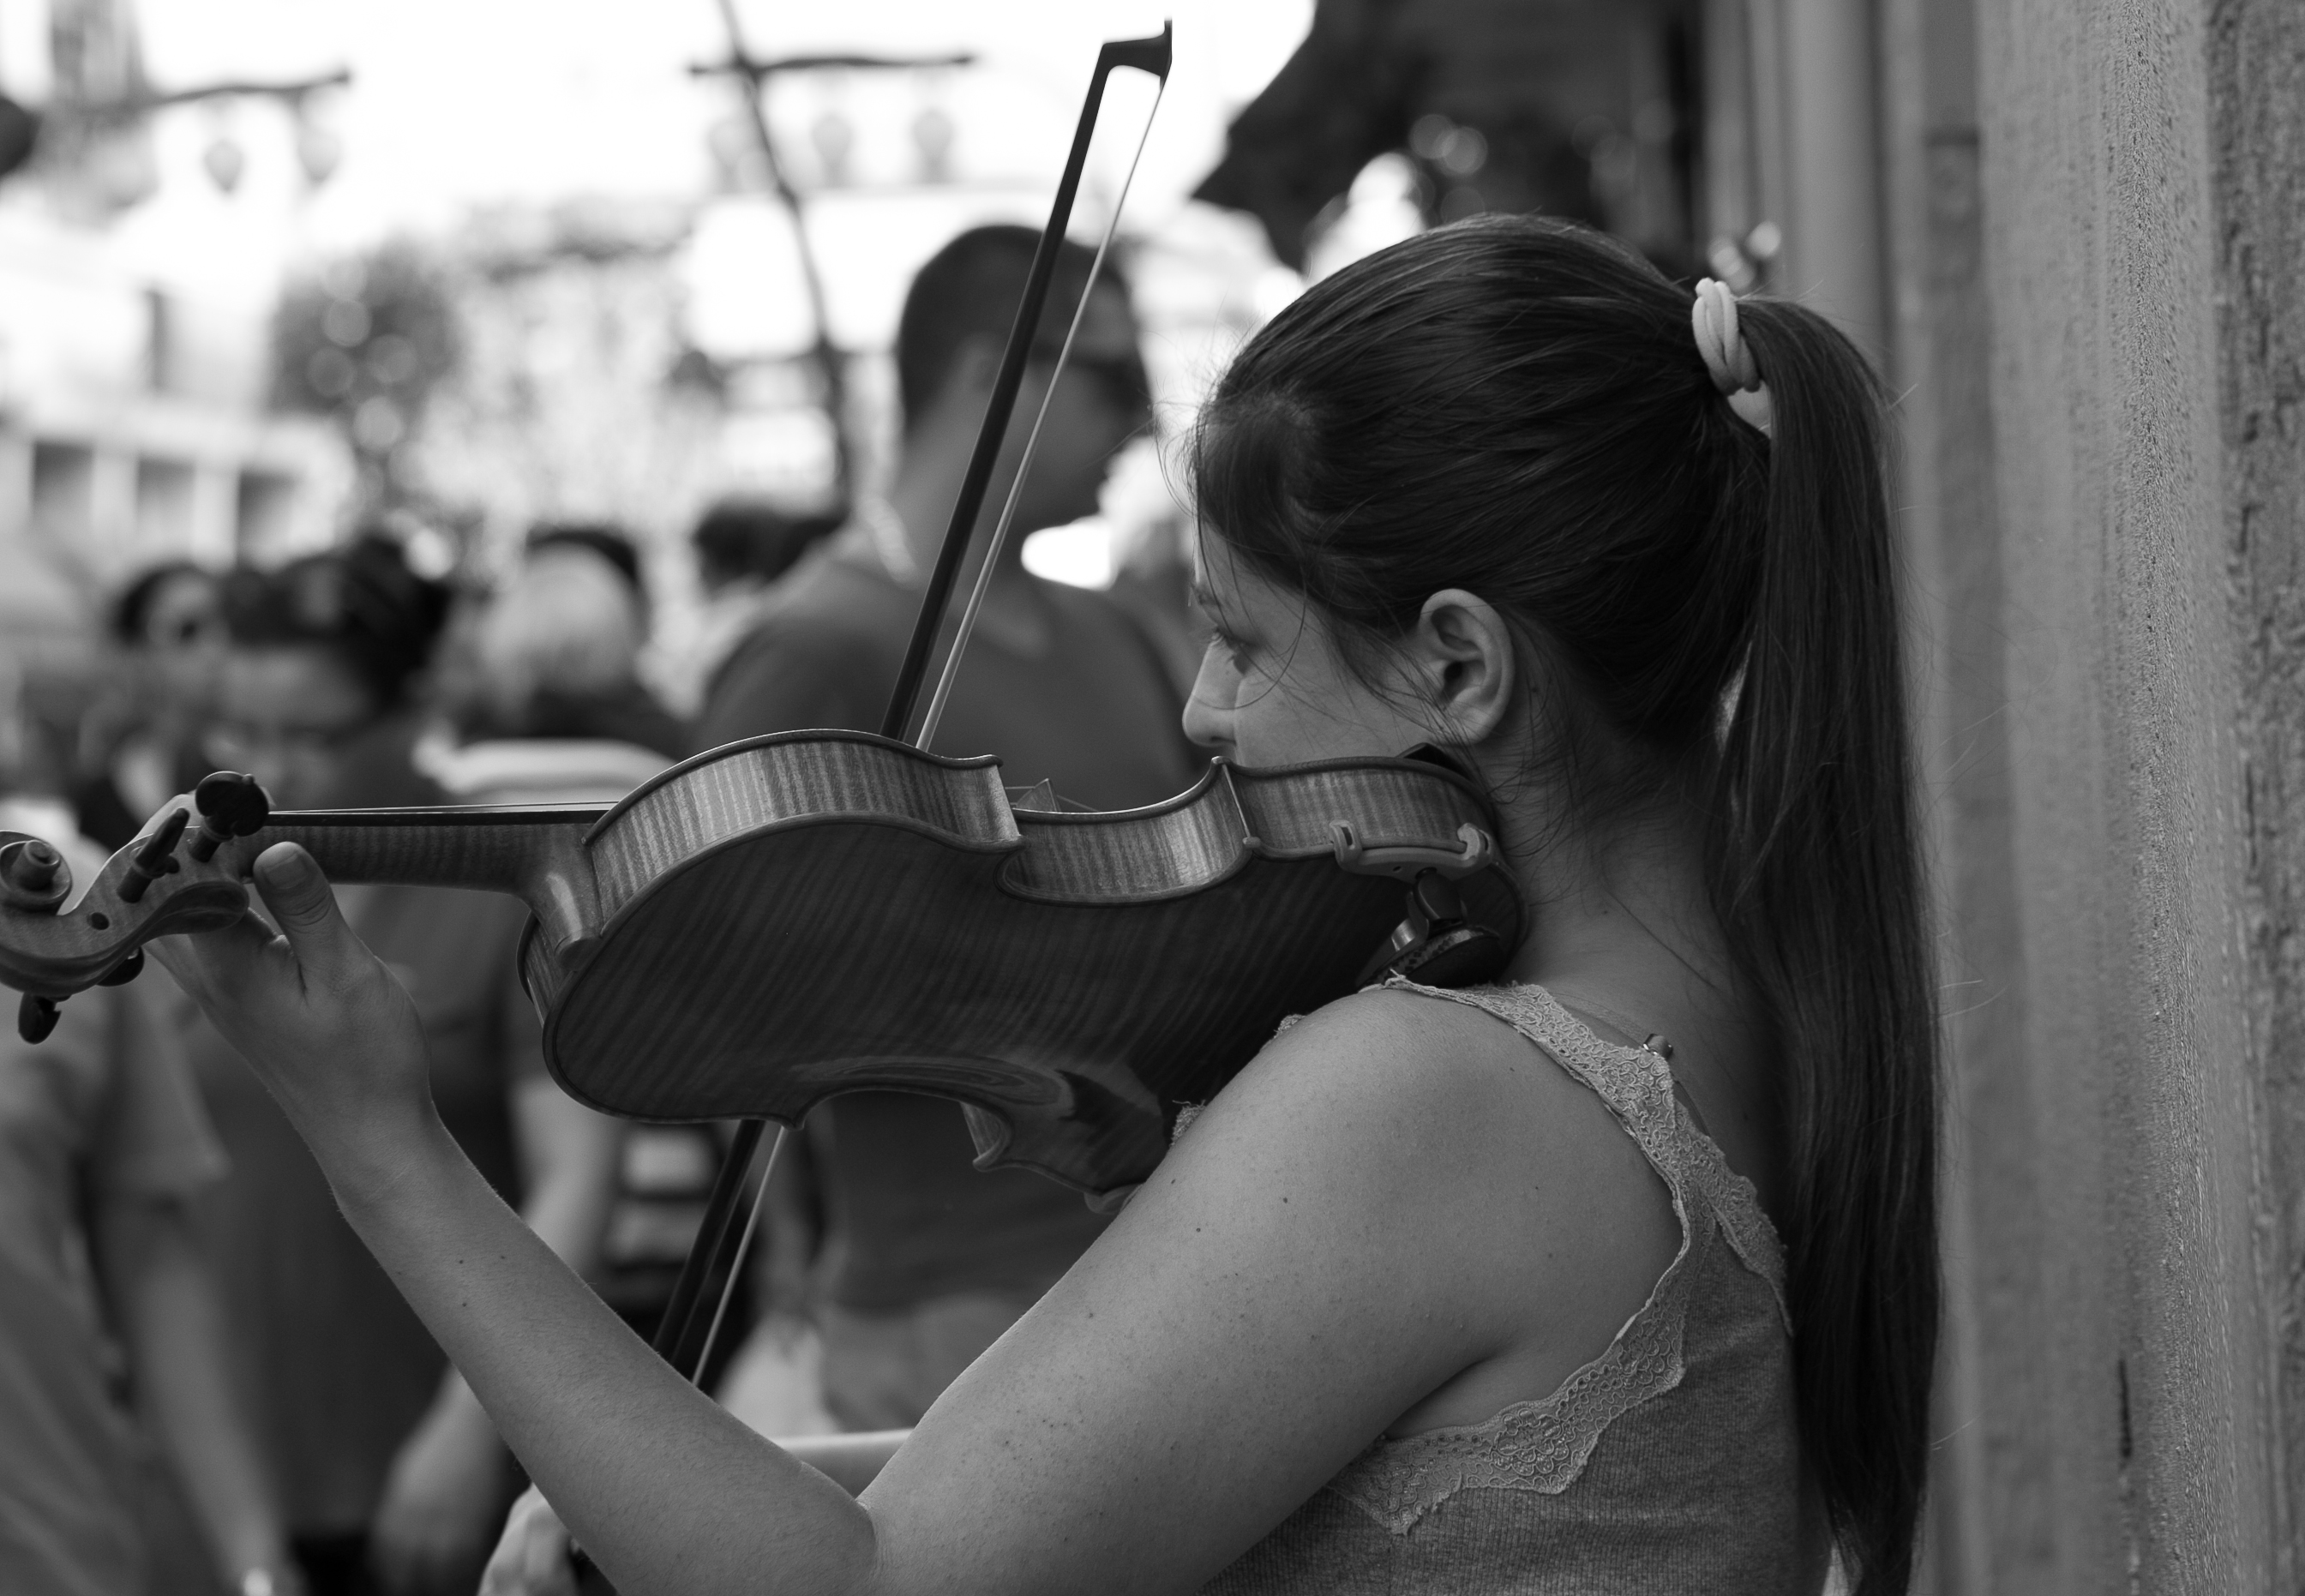 Wallpaper, photograph, violinist, black and white, girl, monochrome photography, violin family, string instrument, bowed string instrument, violist, fiddle, musician, musical instrument, smile, portrait photography, music 2689x1862